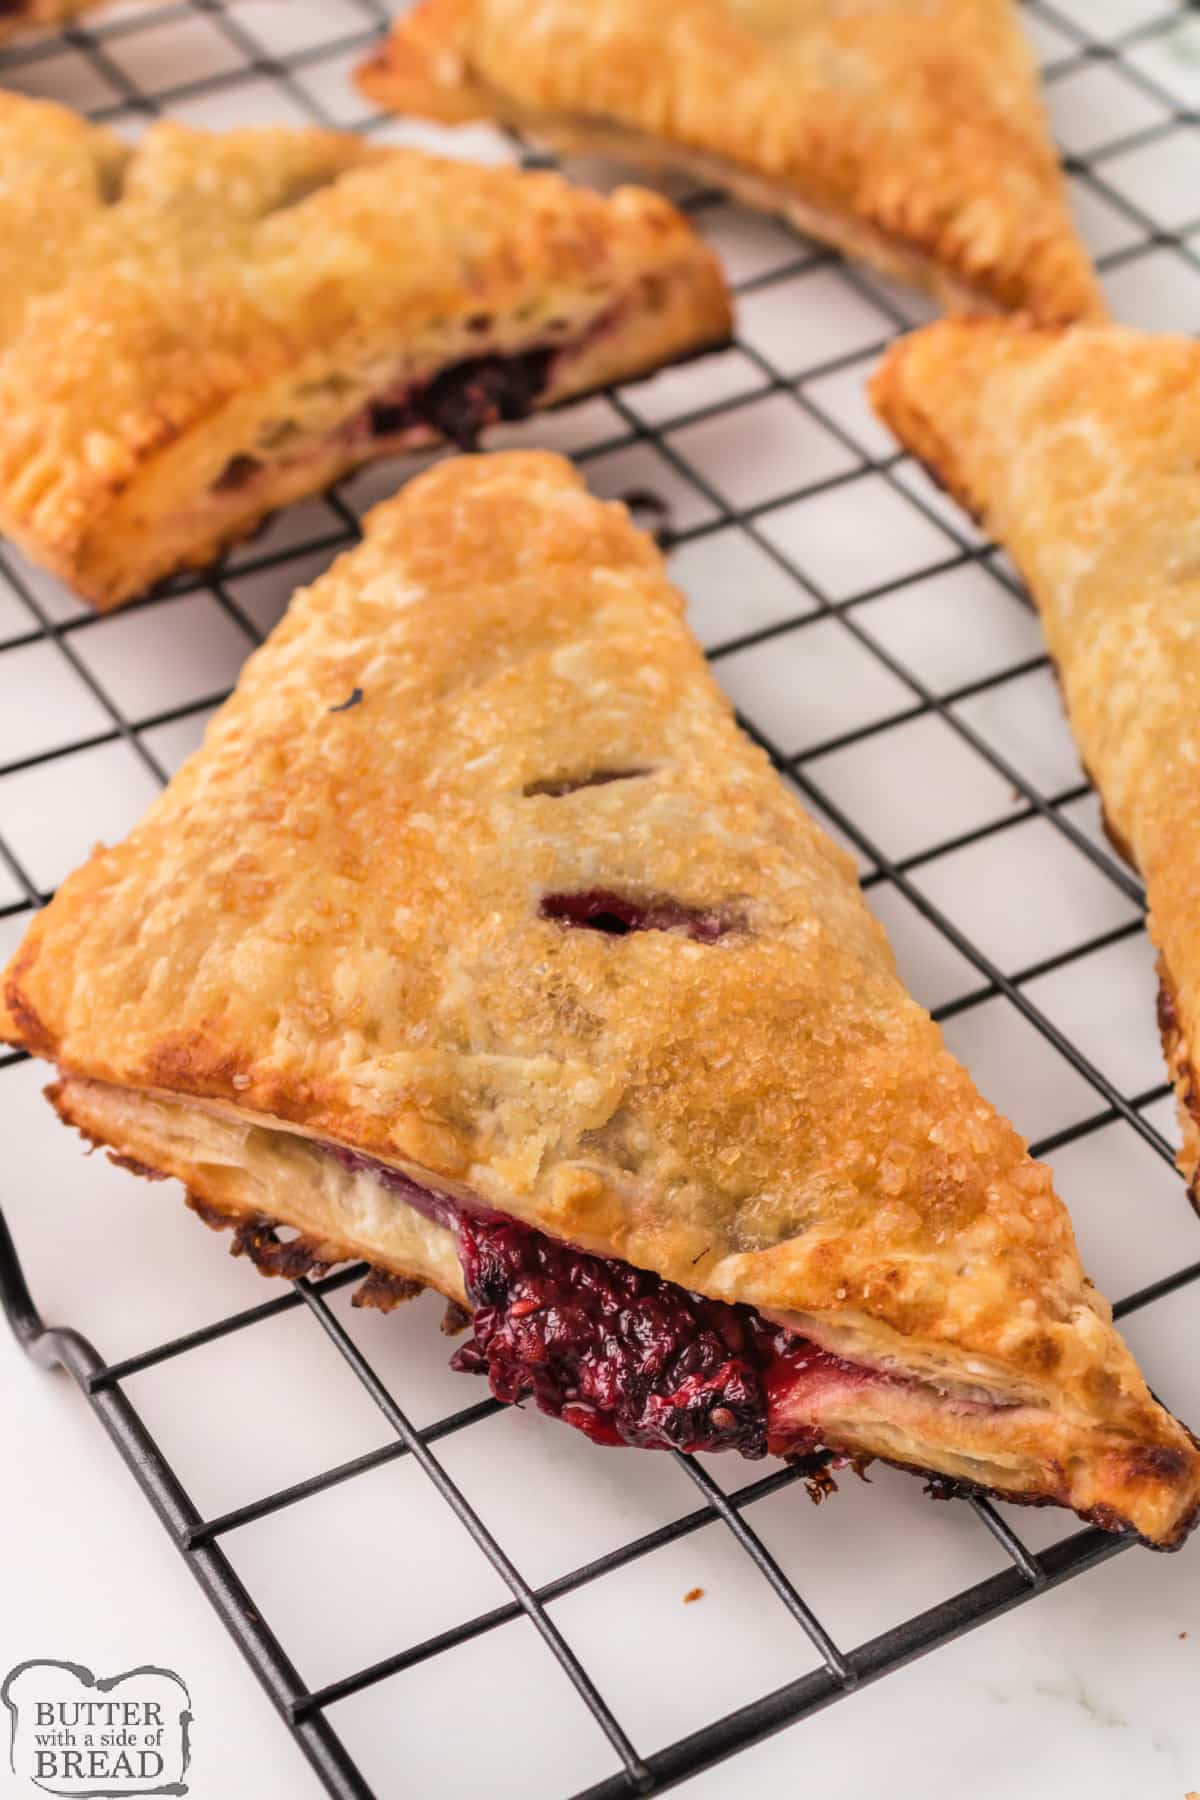 Blackberry turnovers made with puff pastry